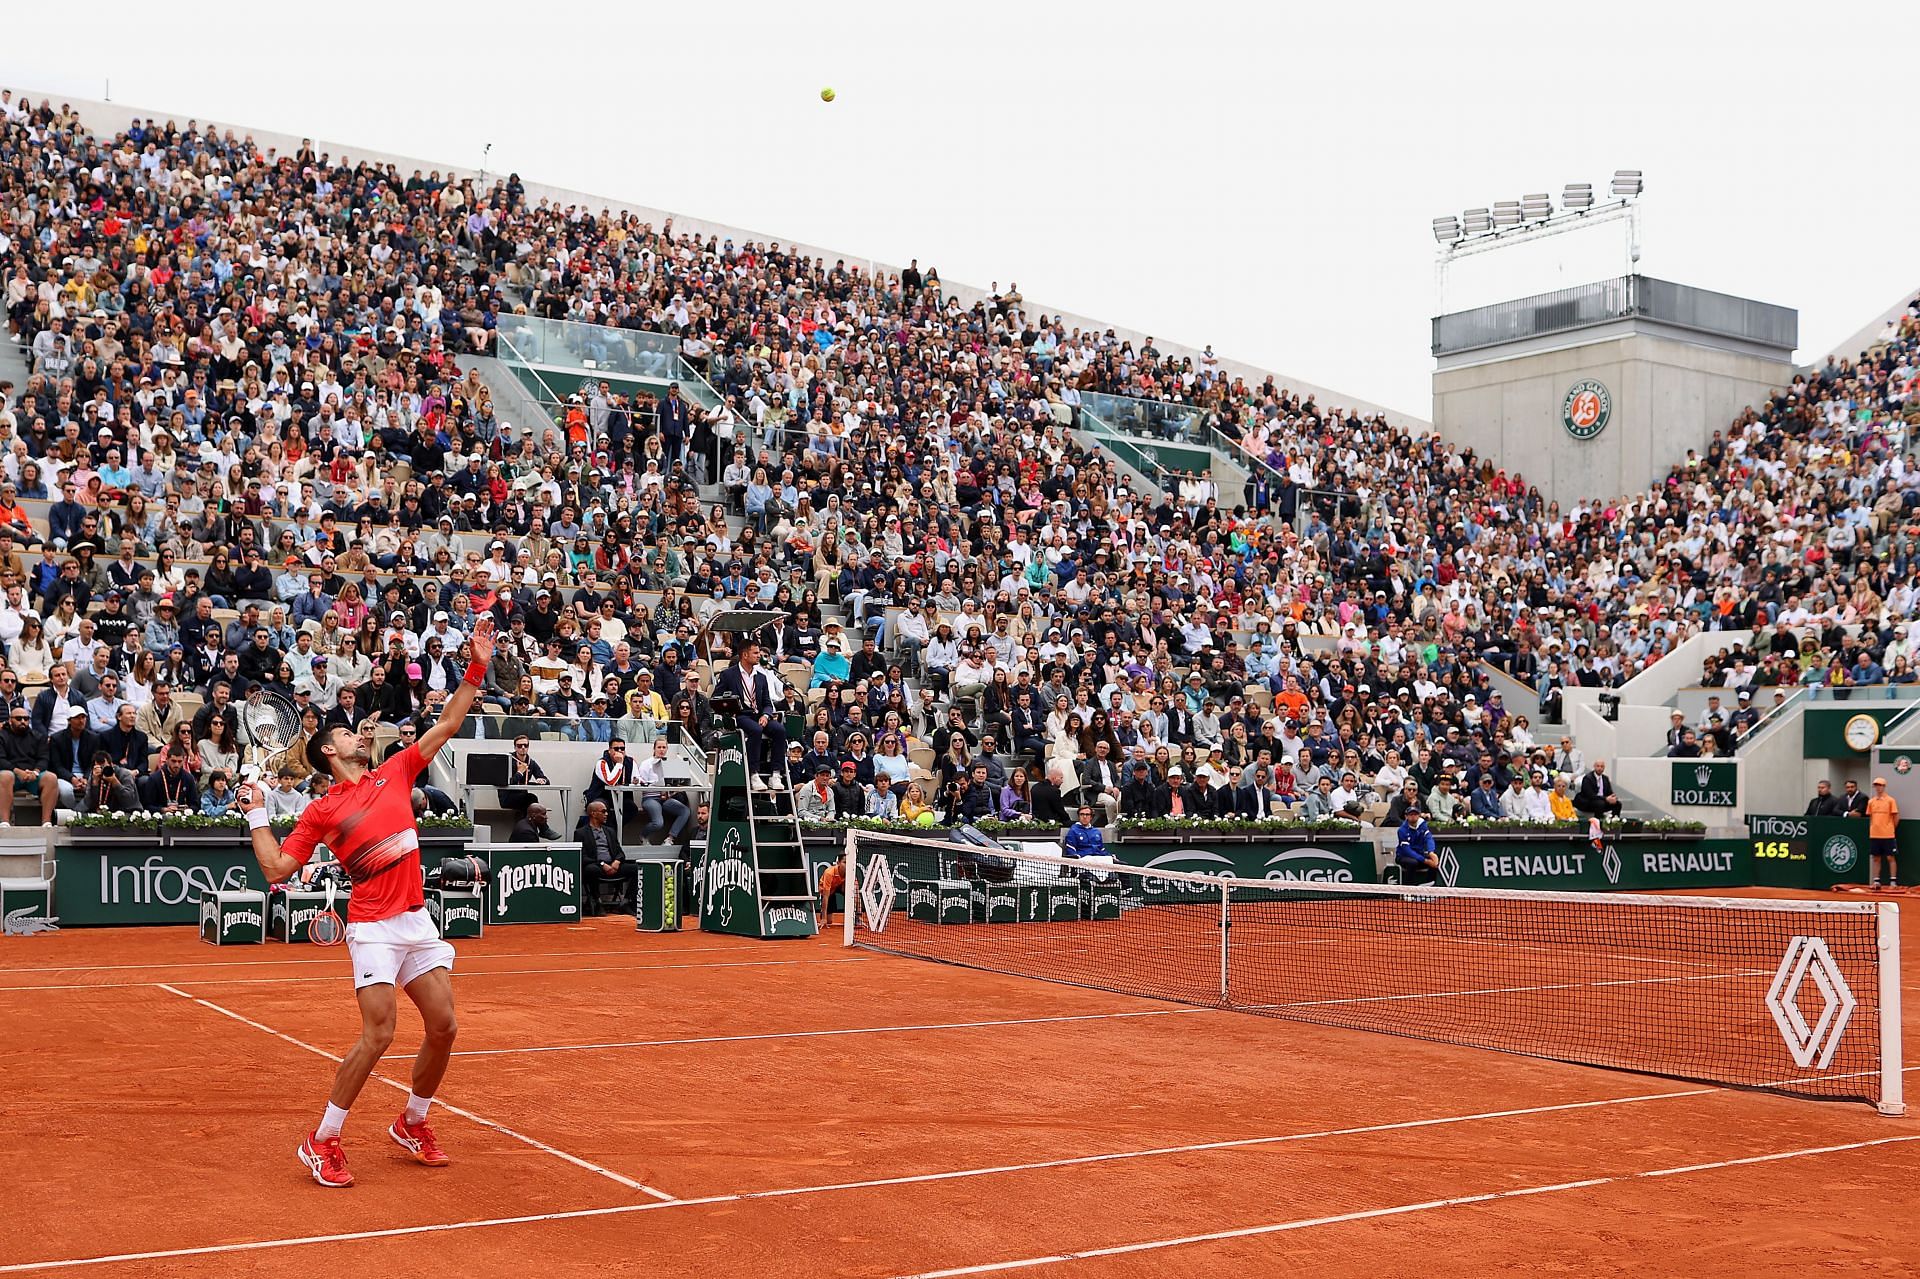 Djokovic in action at the 2022 French Open - Fourth round